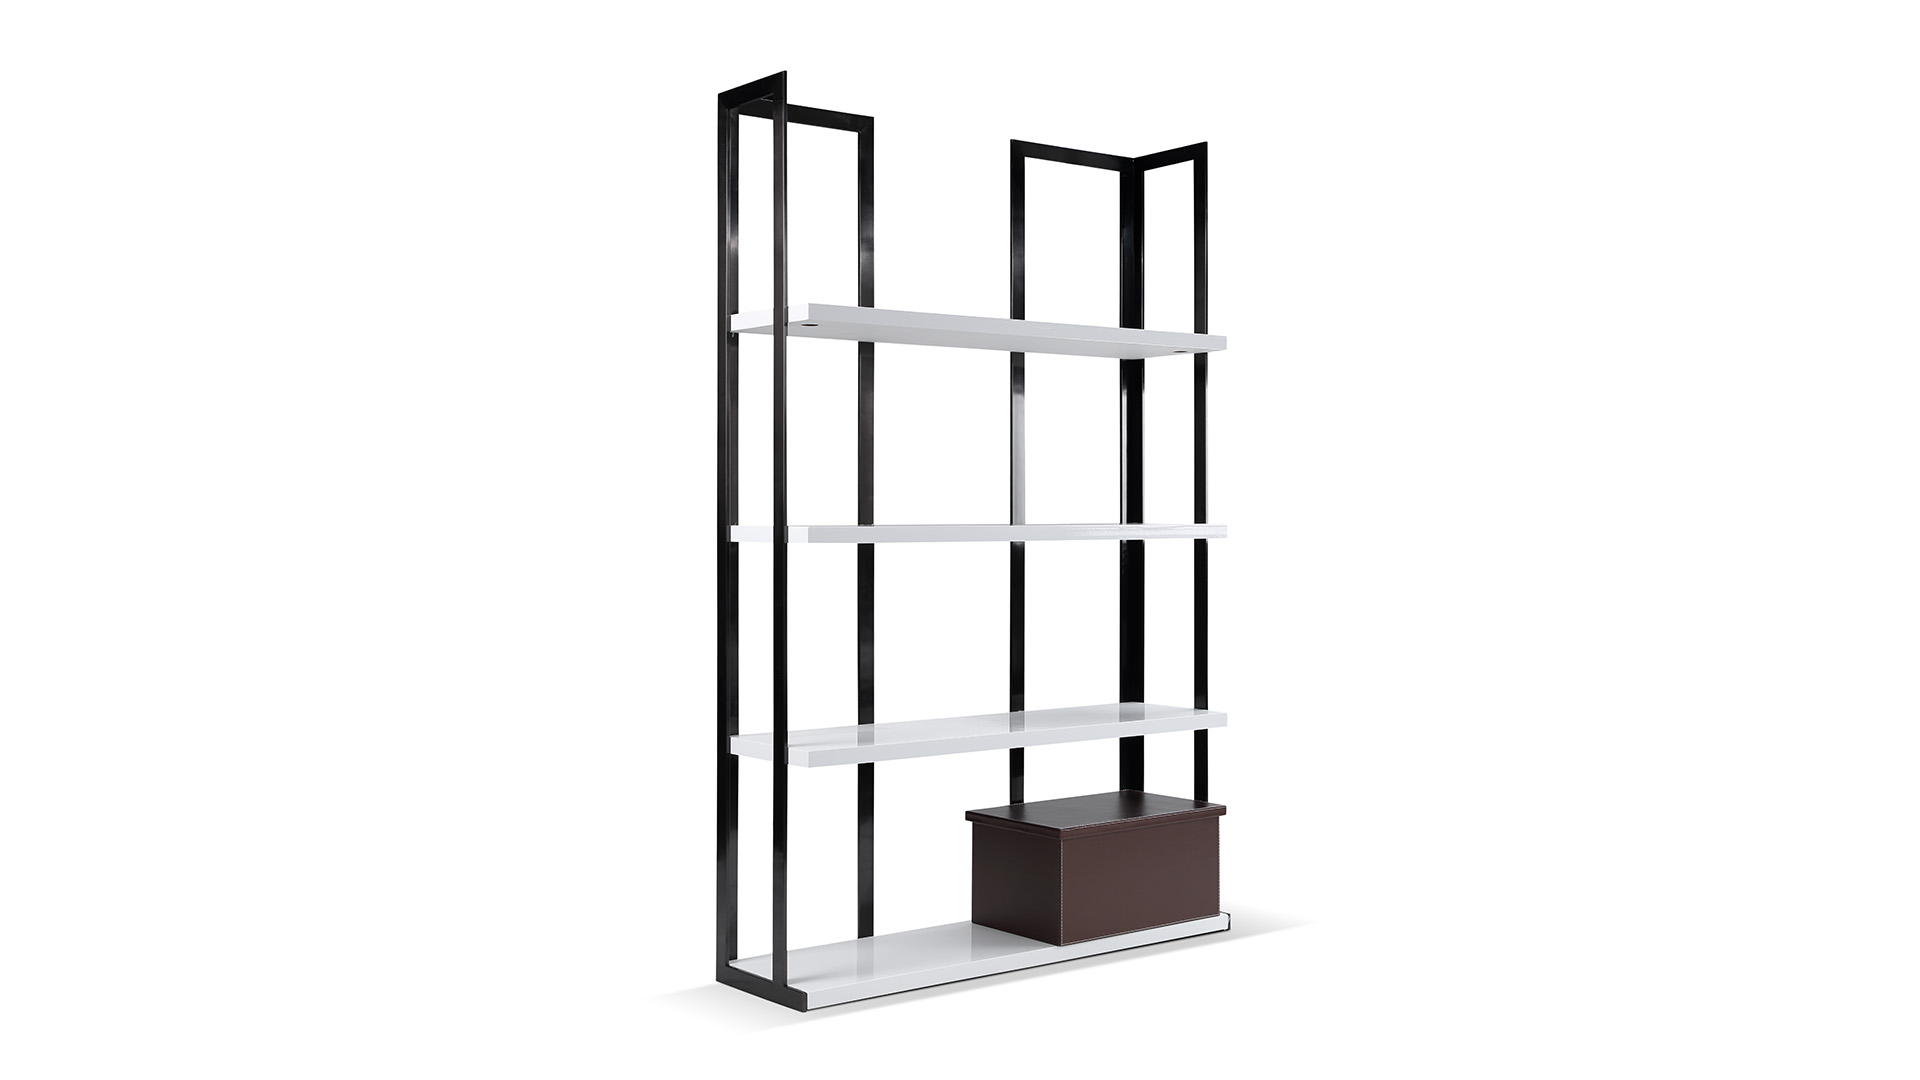 <p>Material:</p><p>*Black steel+white high glossy</p><p><br/></p><p>Size:</p><p>*1200*330*1900mm</p>